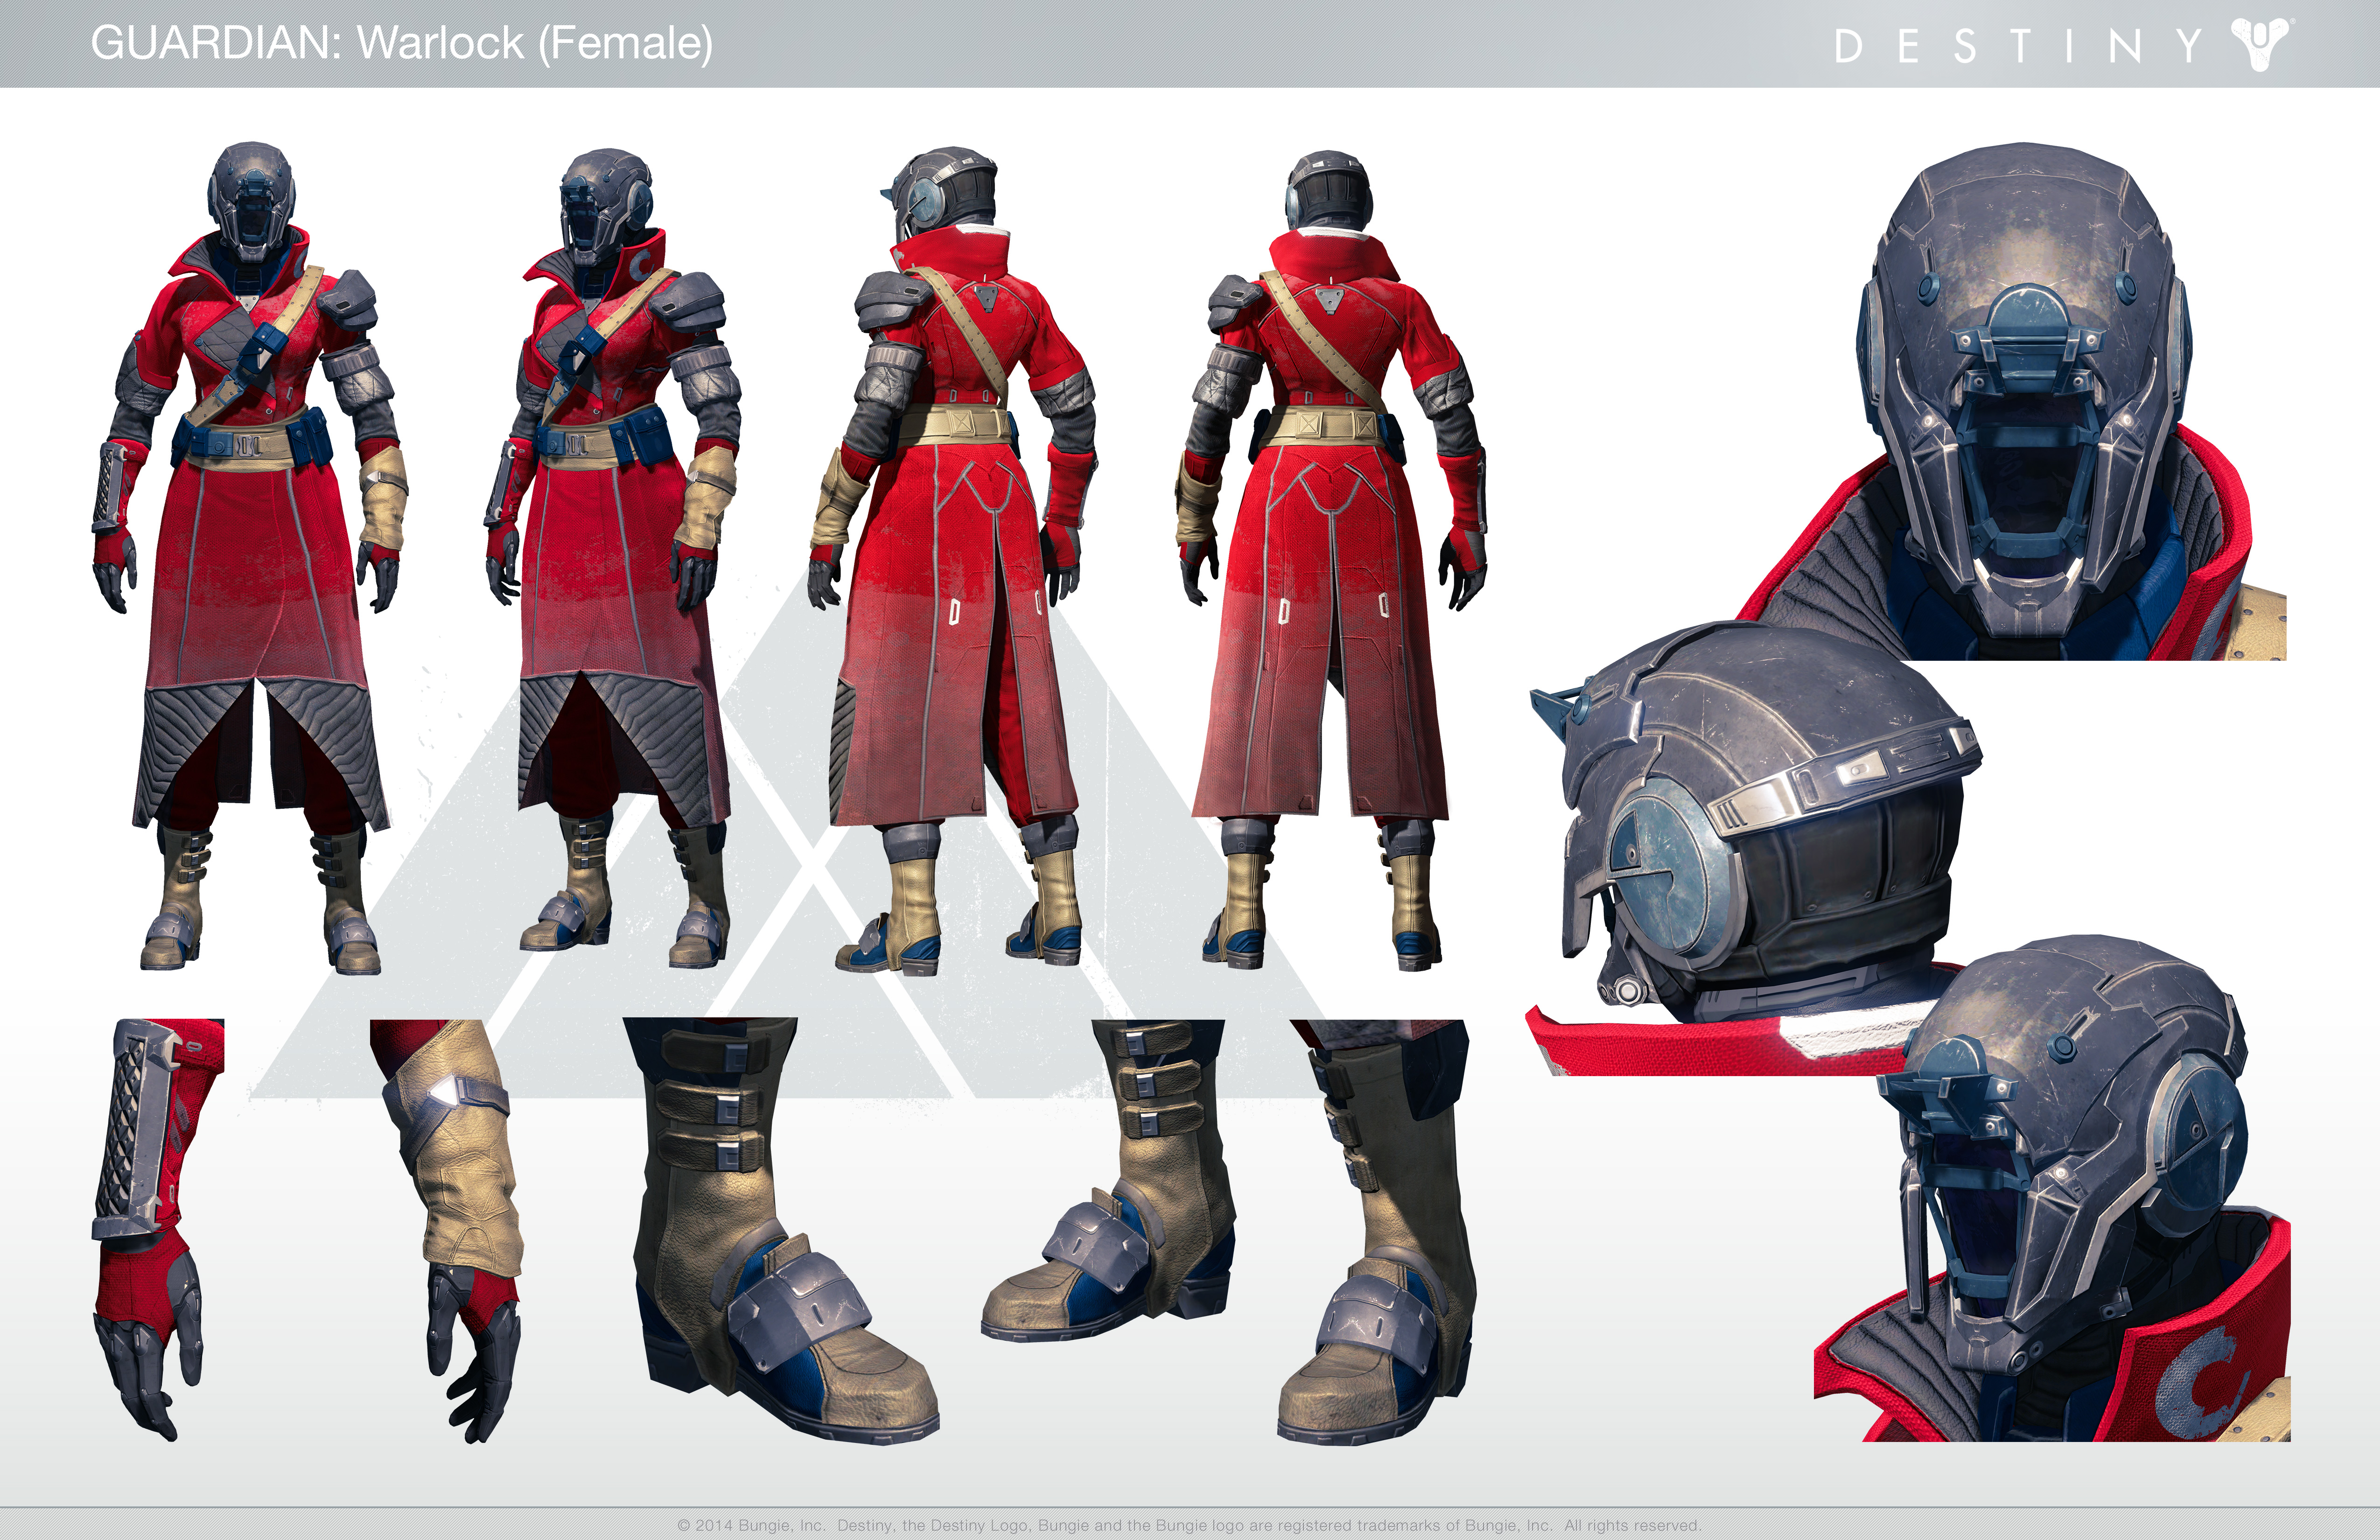 Dress Up As Your Favorite Guardian With This Handy Destiny Cosplay